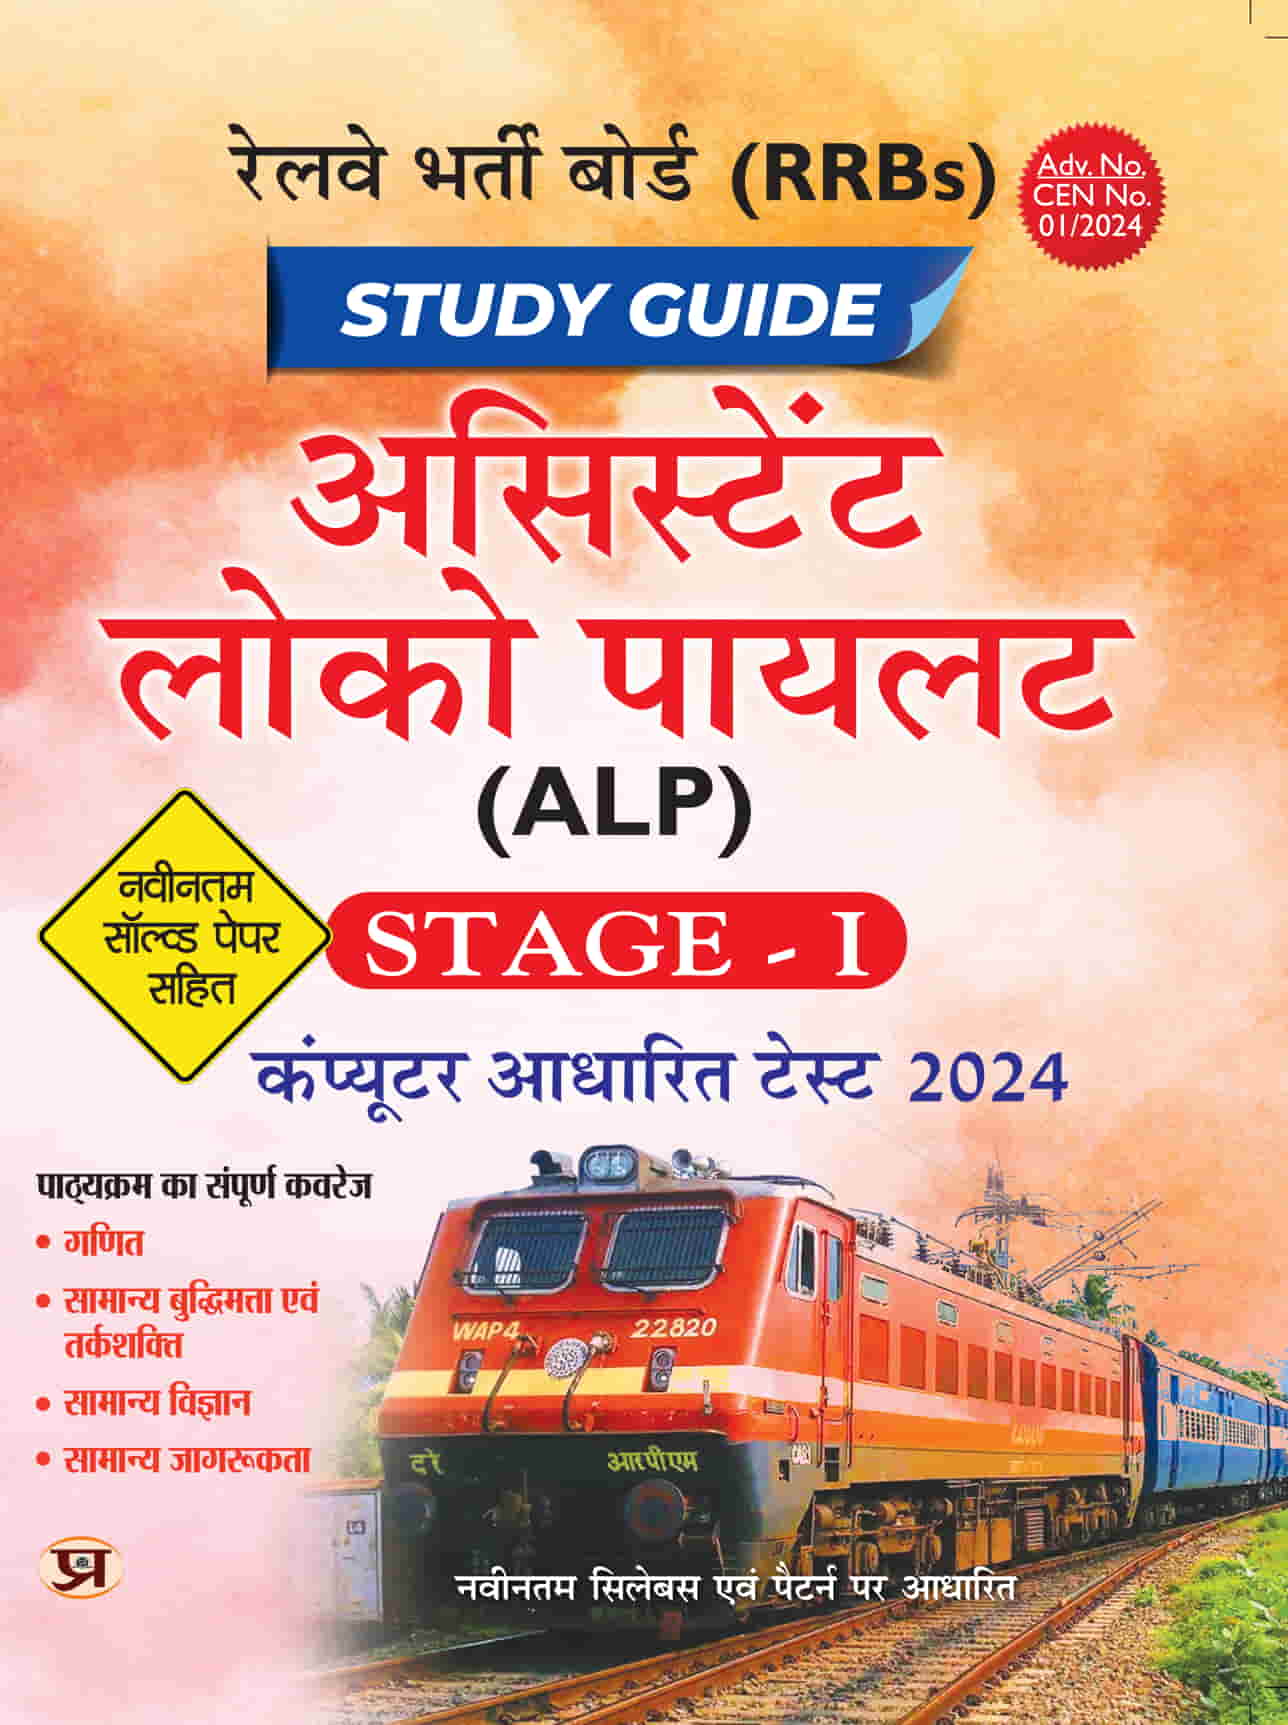 RRBs: Railway Assistant Loco Pilot (ALP) Study Guide 2024, Stage - 1 | Computer Based Test & Include Latest Solved Papers | Book in Hindi